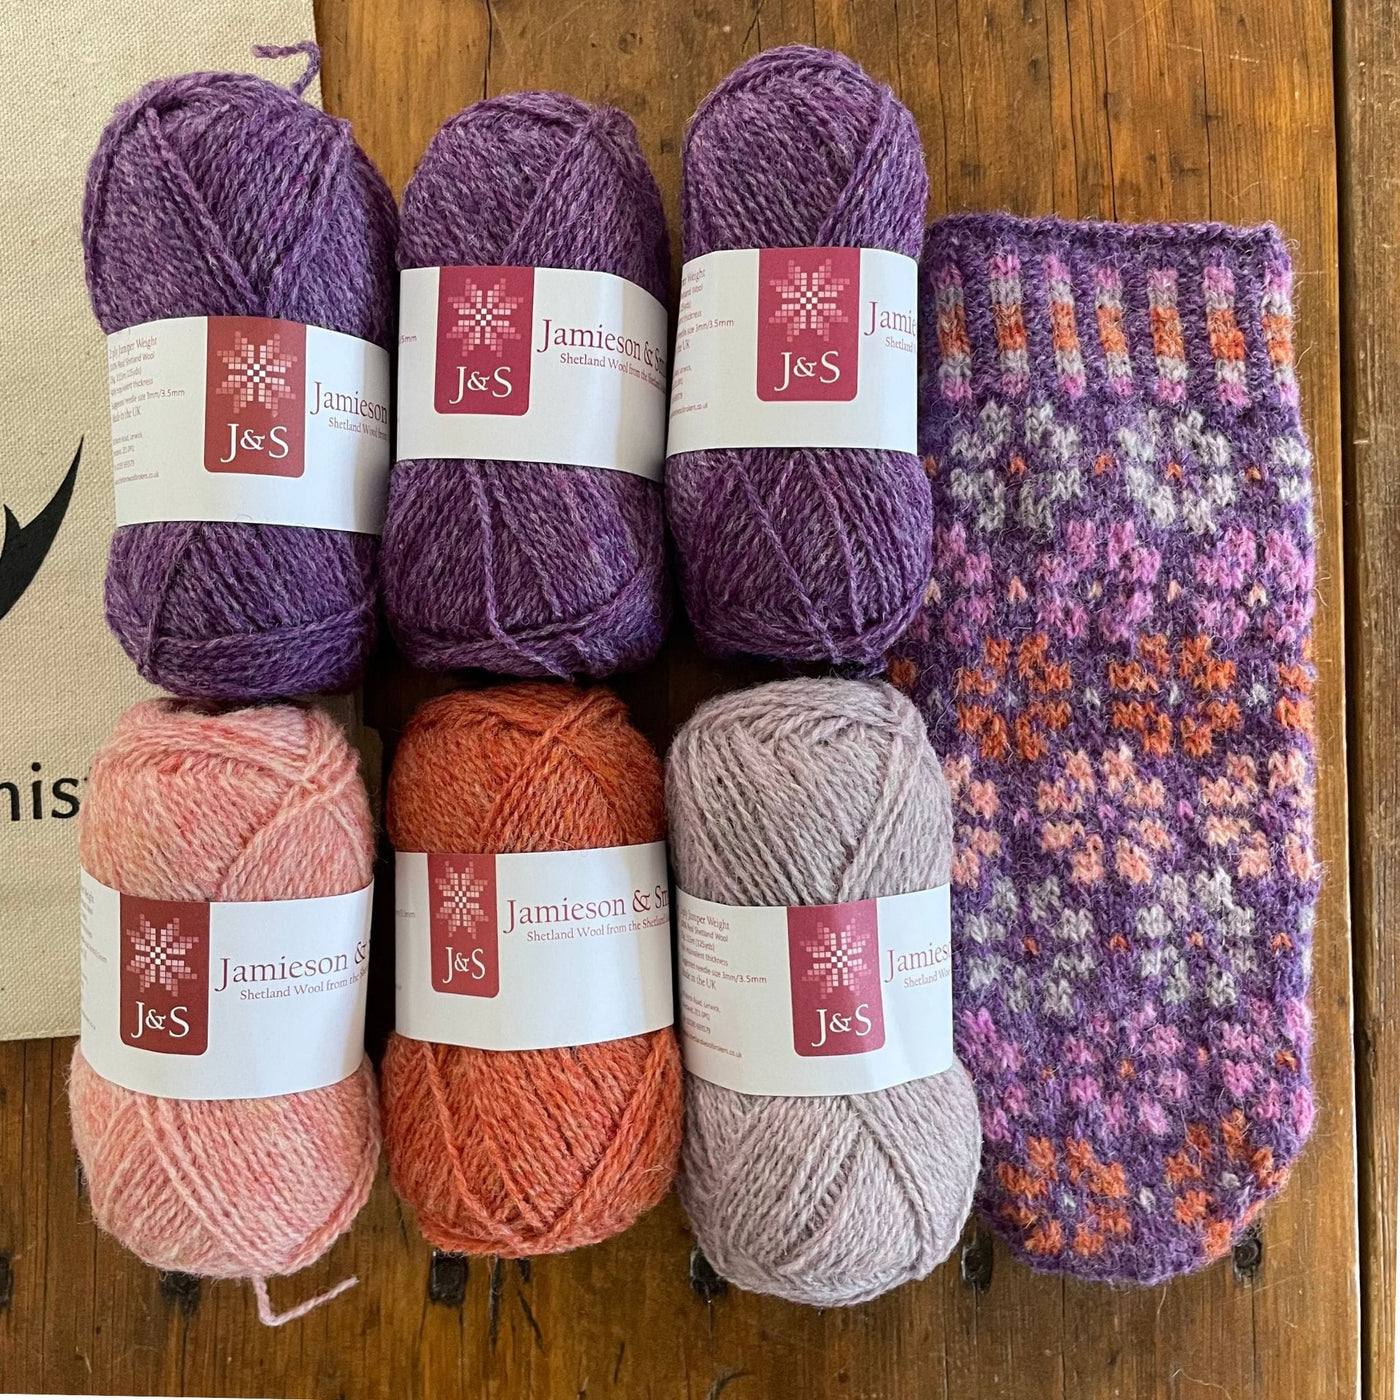 Flowers of Fortrose Hat & Mittens Kit - J&S 2ply